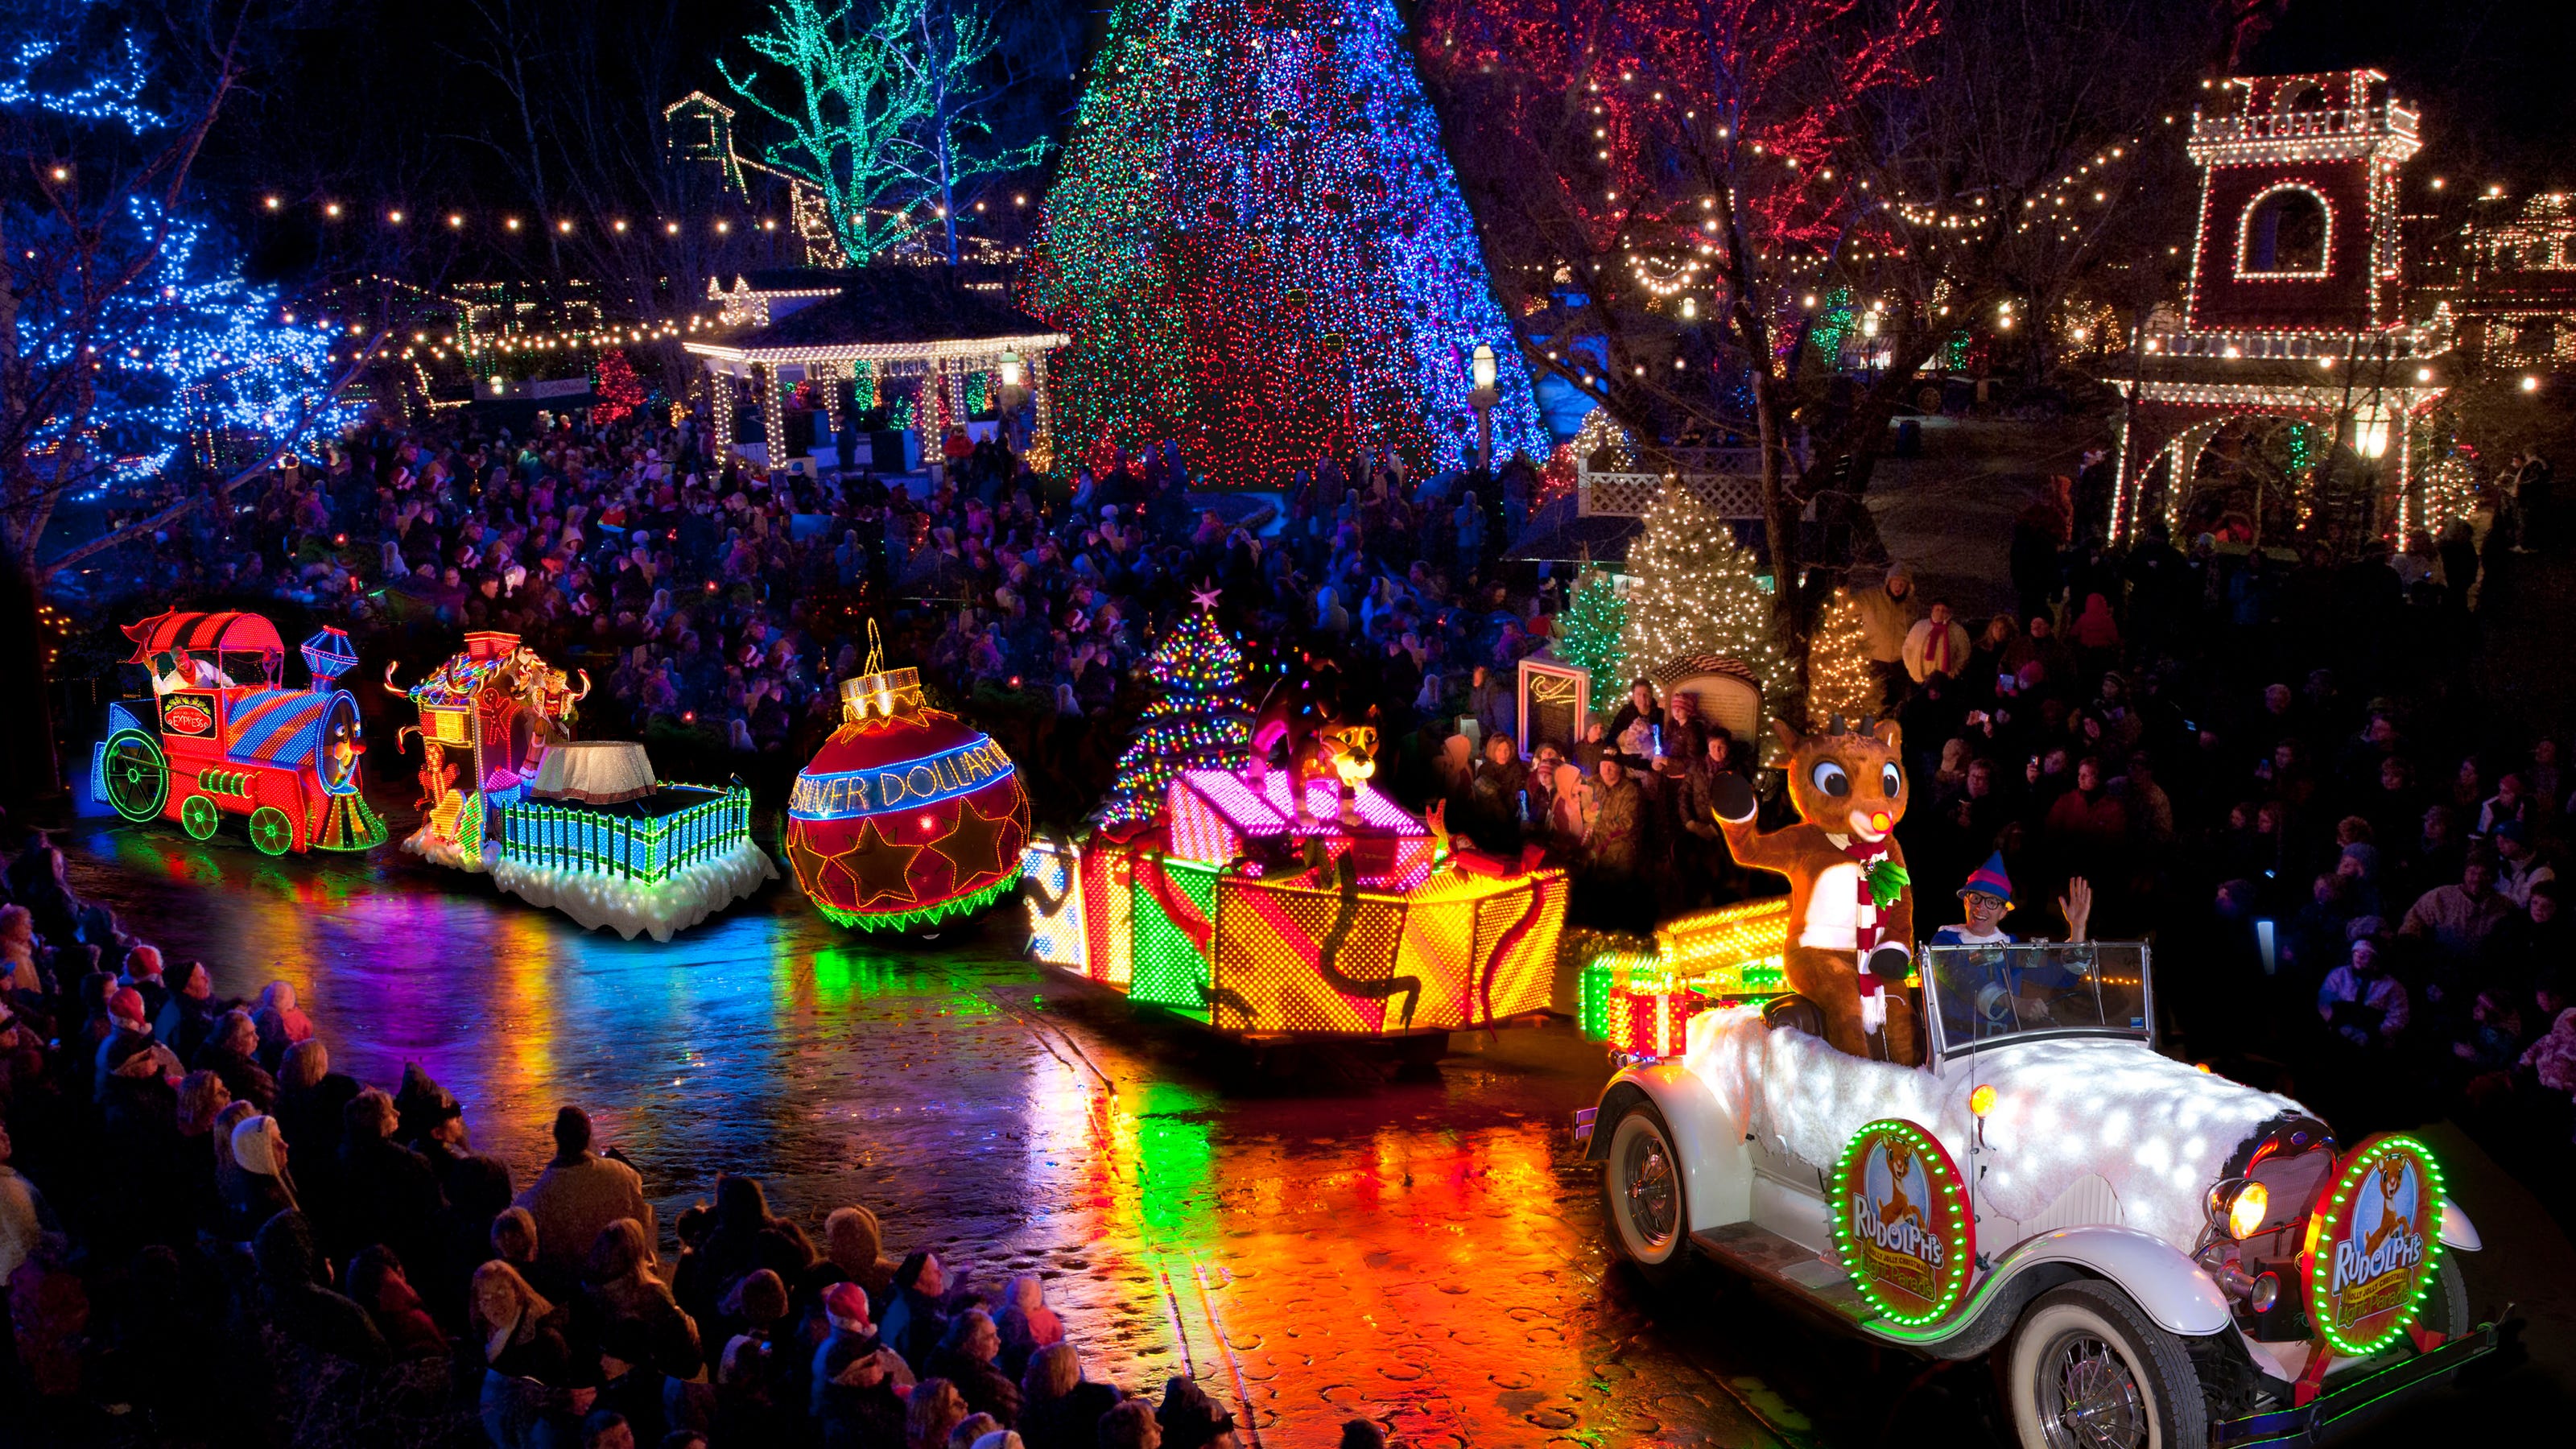 Branson at Christmas Theme parks, shows light up with holiday cheer